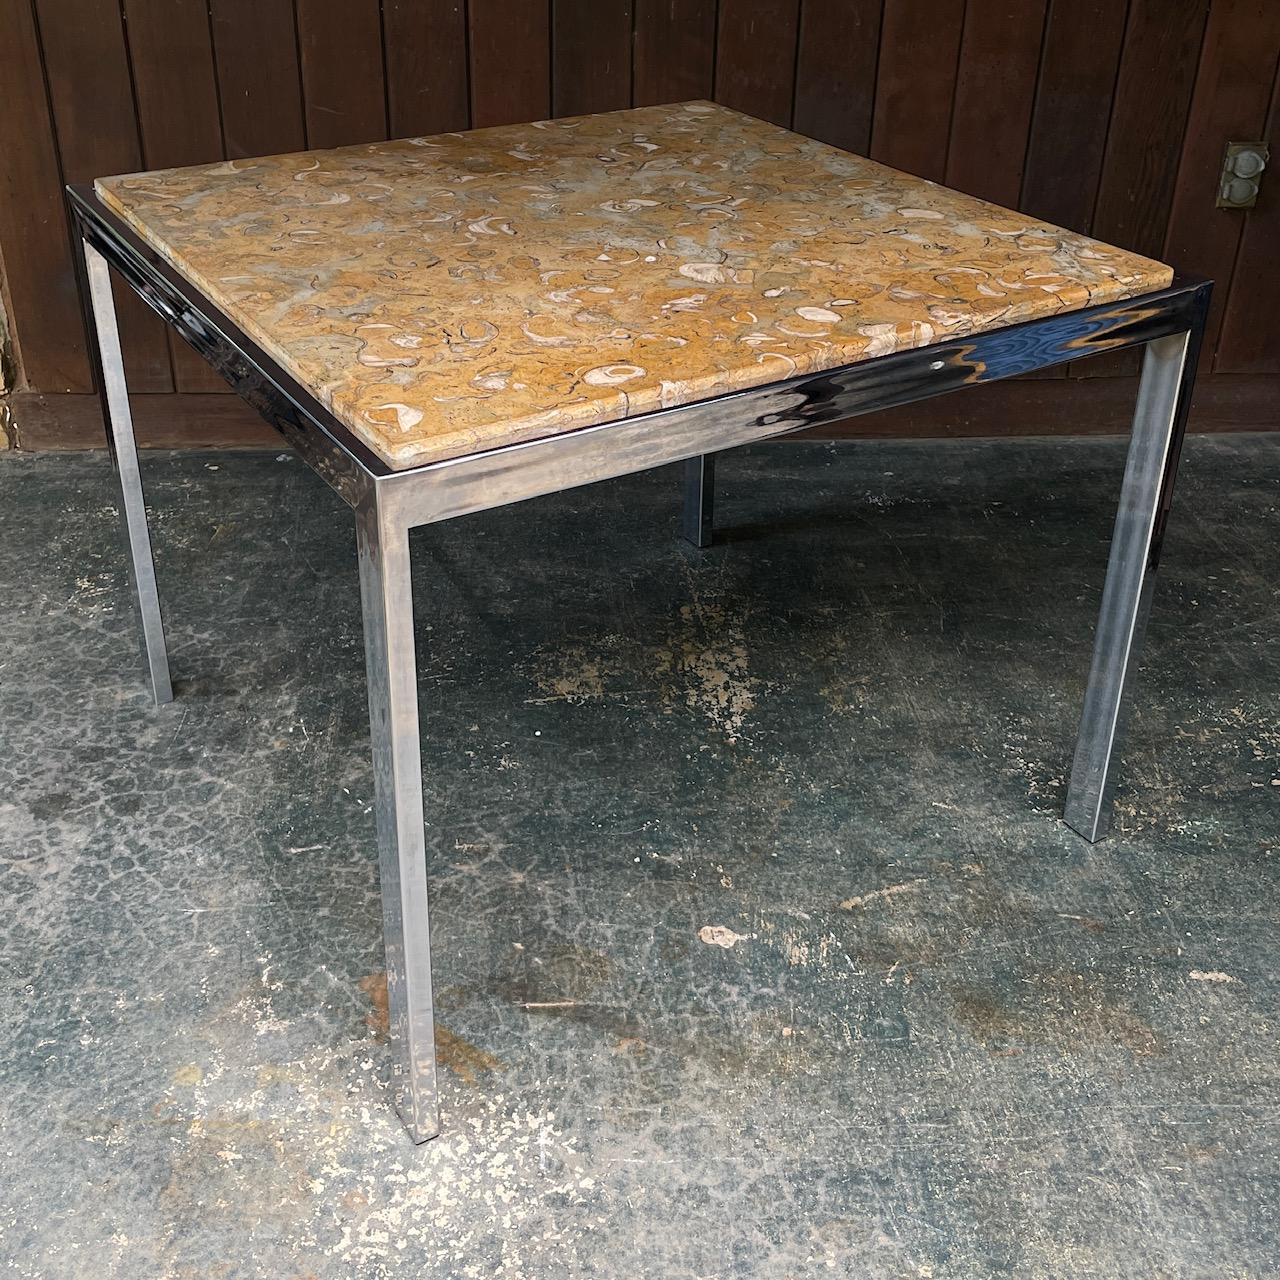 Polished DIA Fossilized Stone Steel Dining Table Vintage Mid-Century Post-Modern For Sale